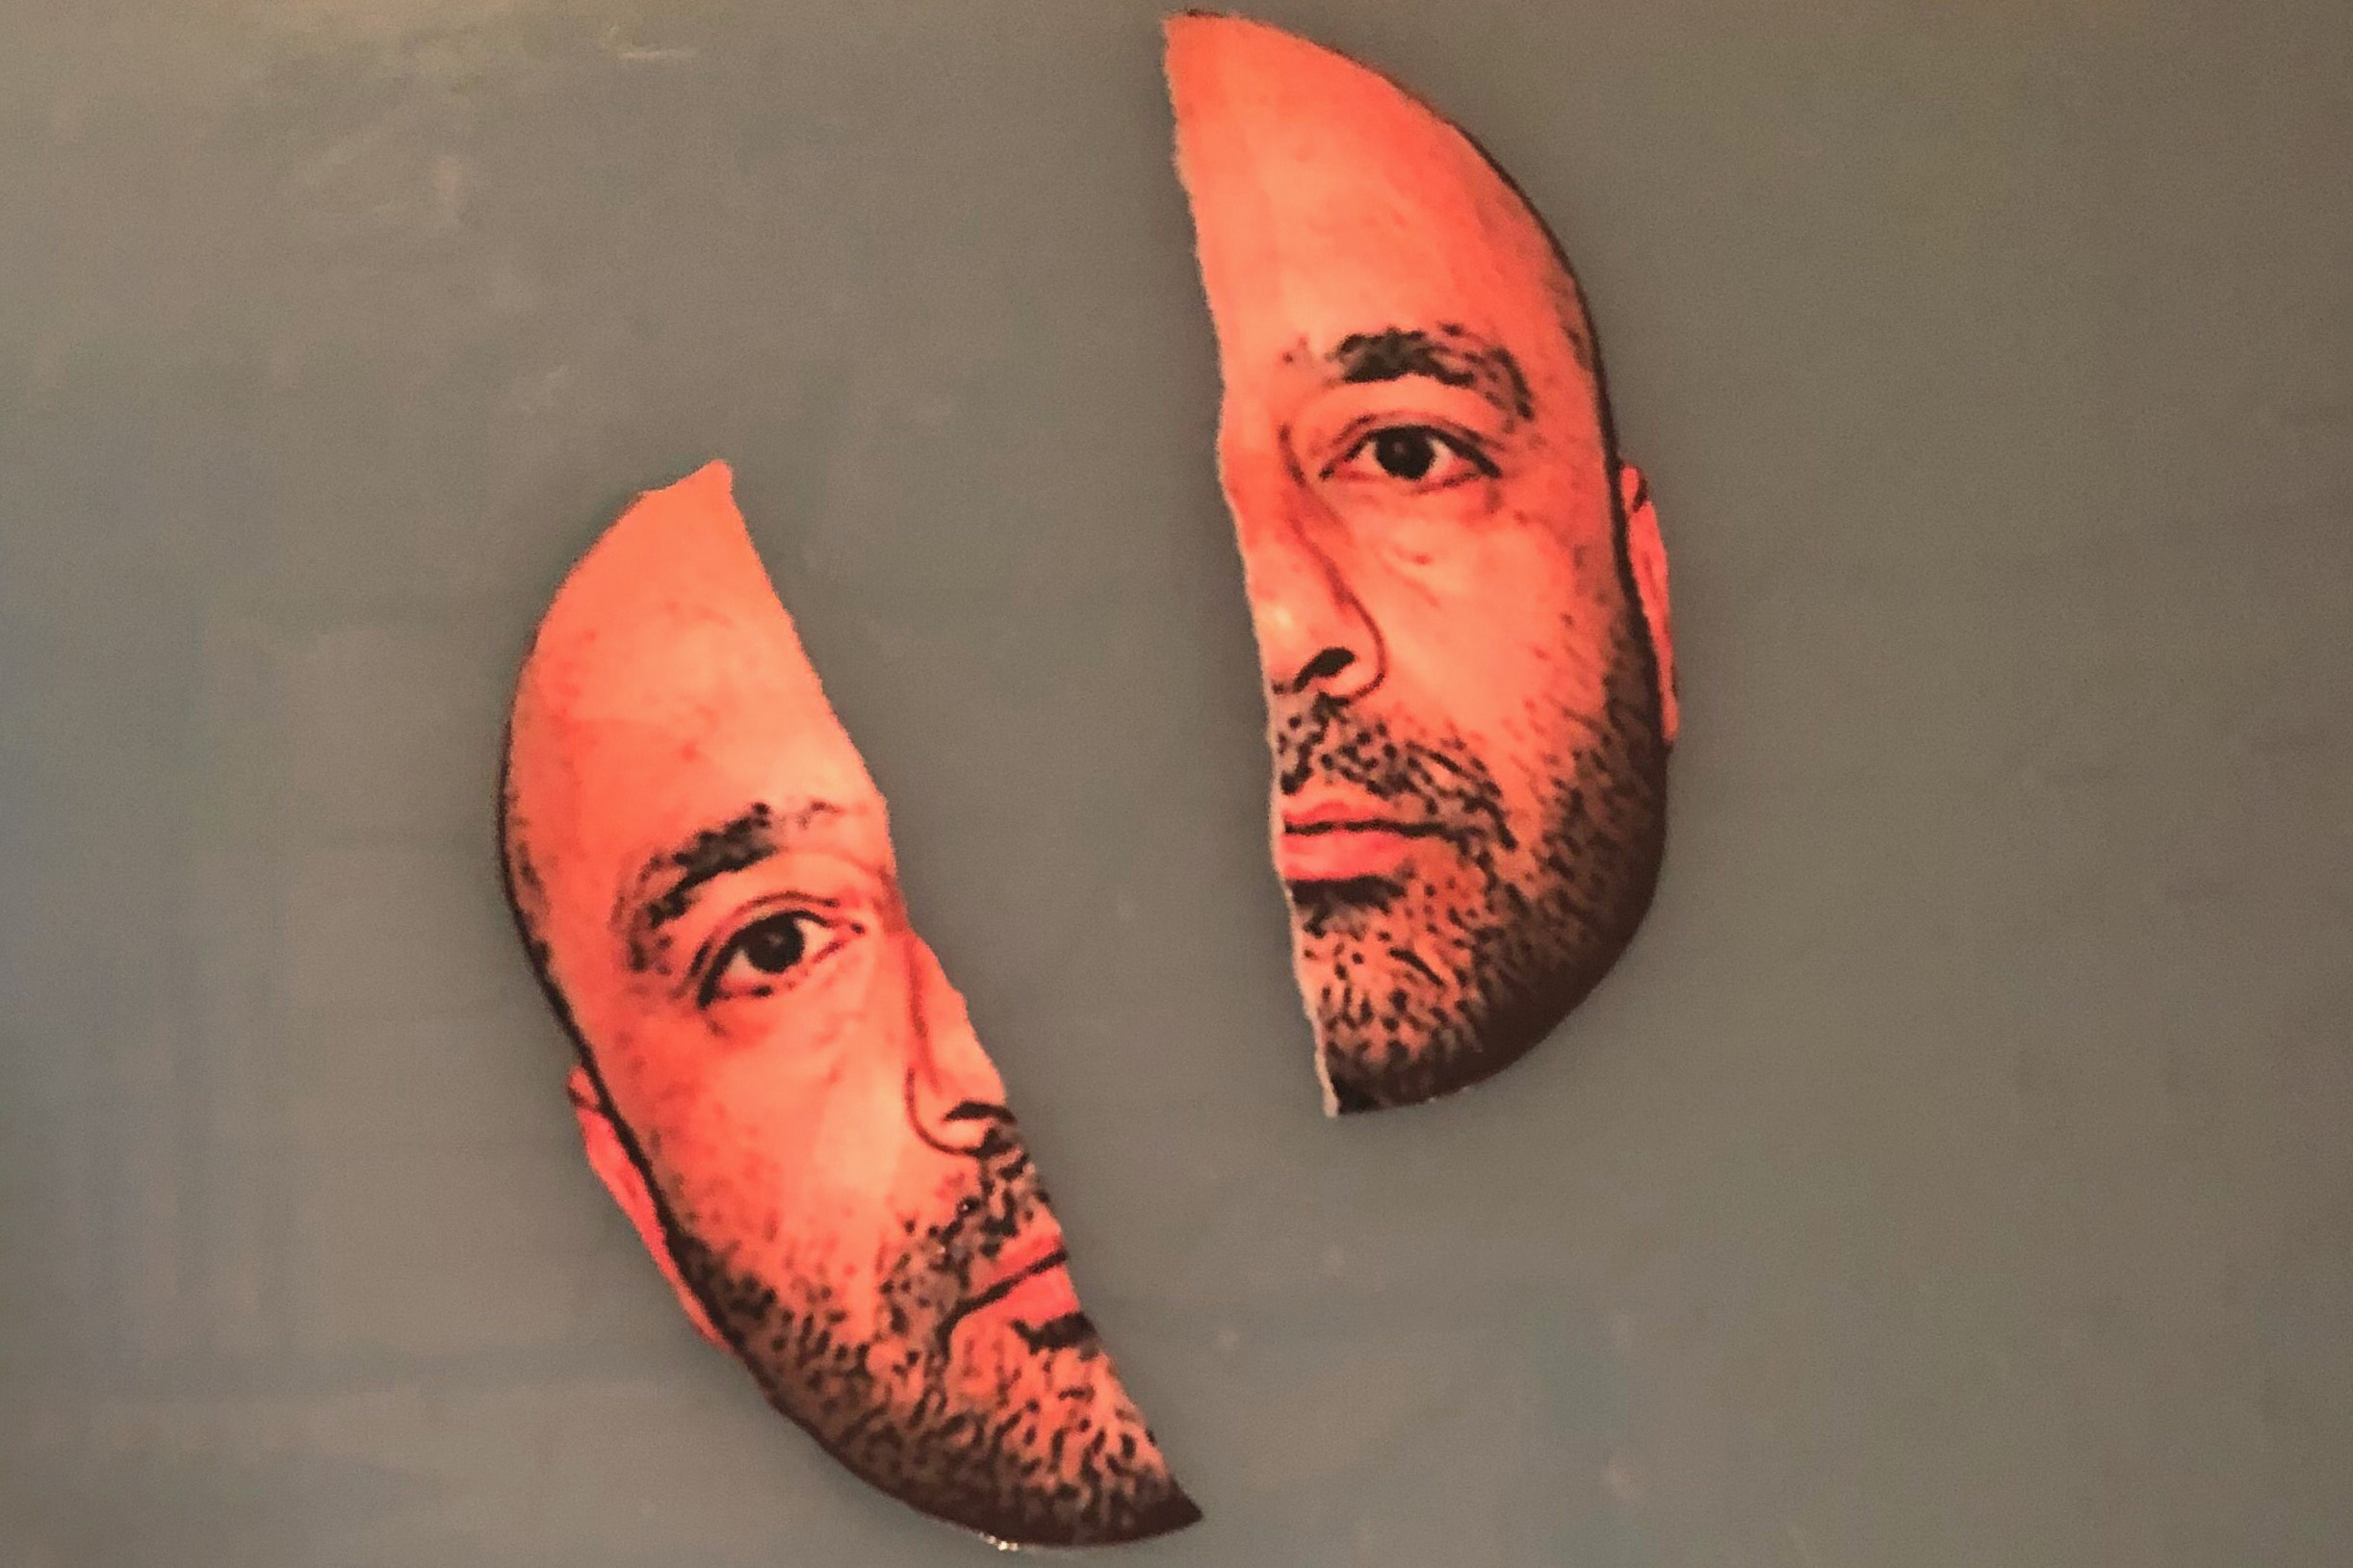 Picture of Ali Dadgar's face that has been cut in half length-wise and placed on a brown background.